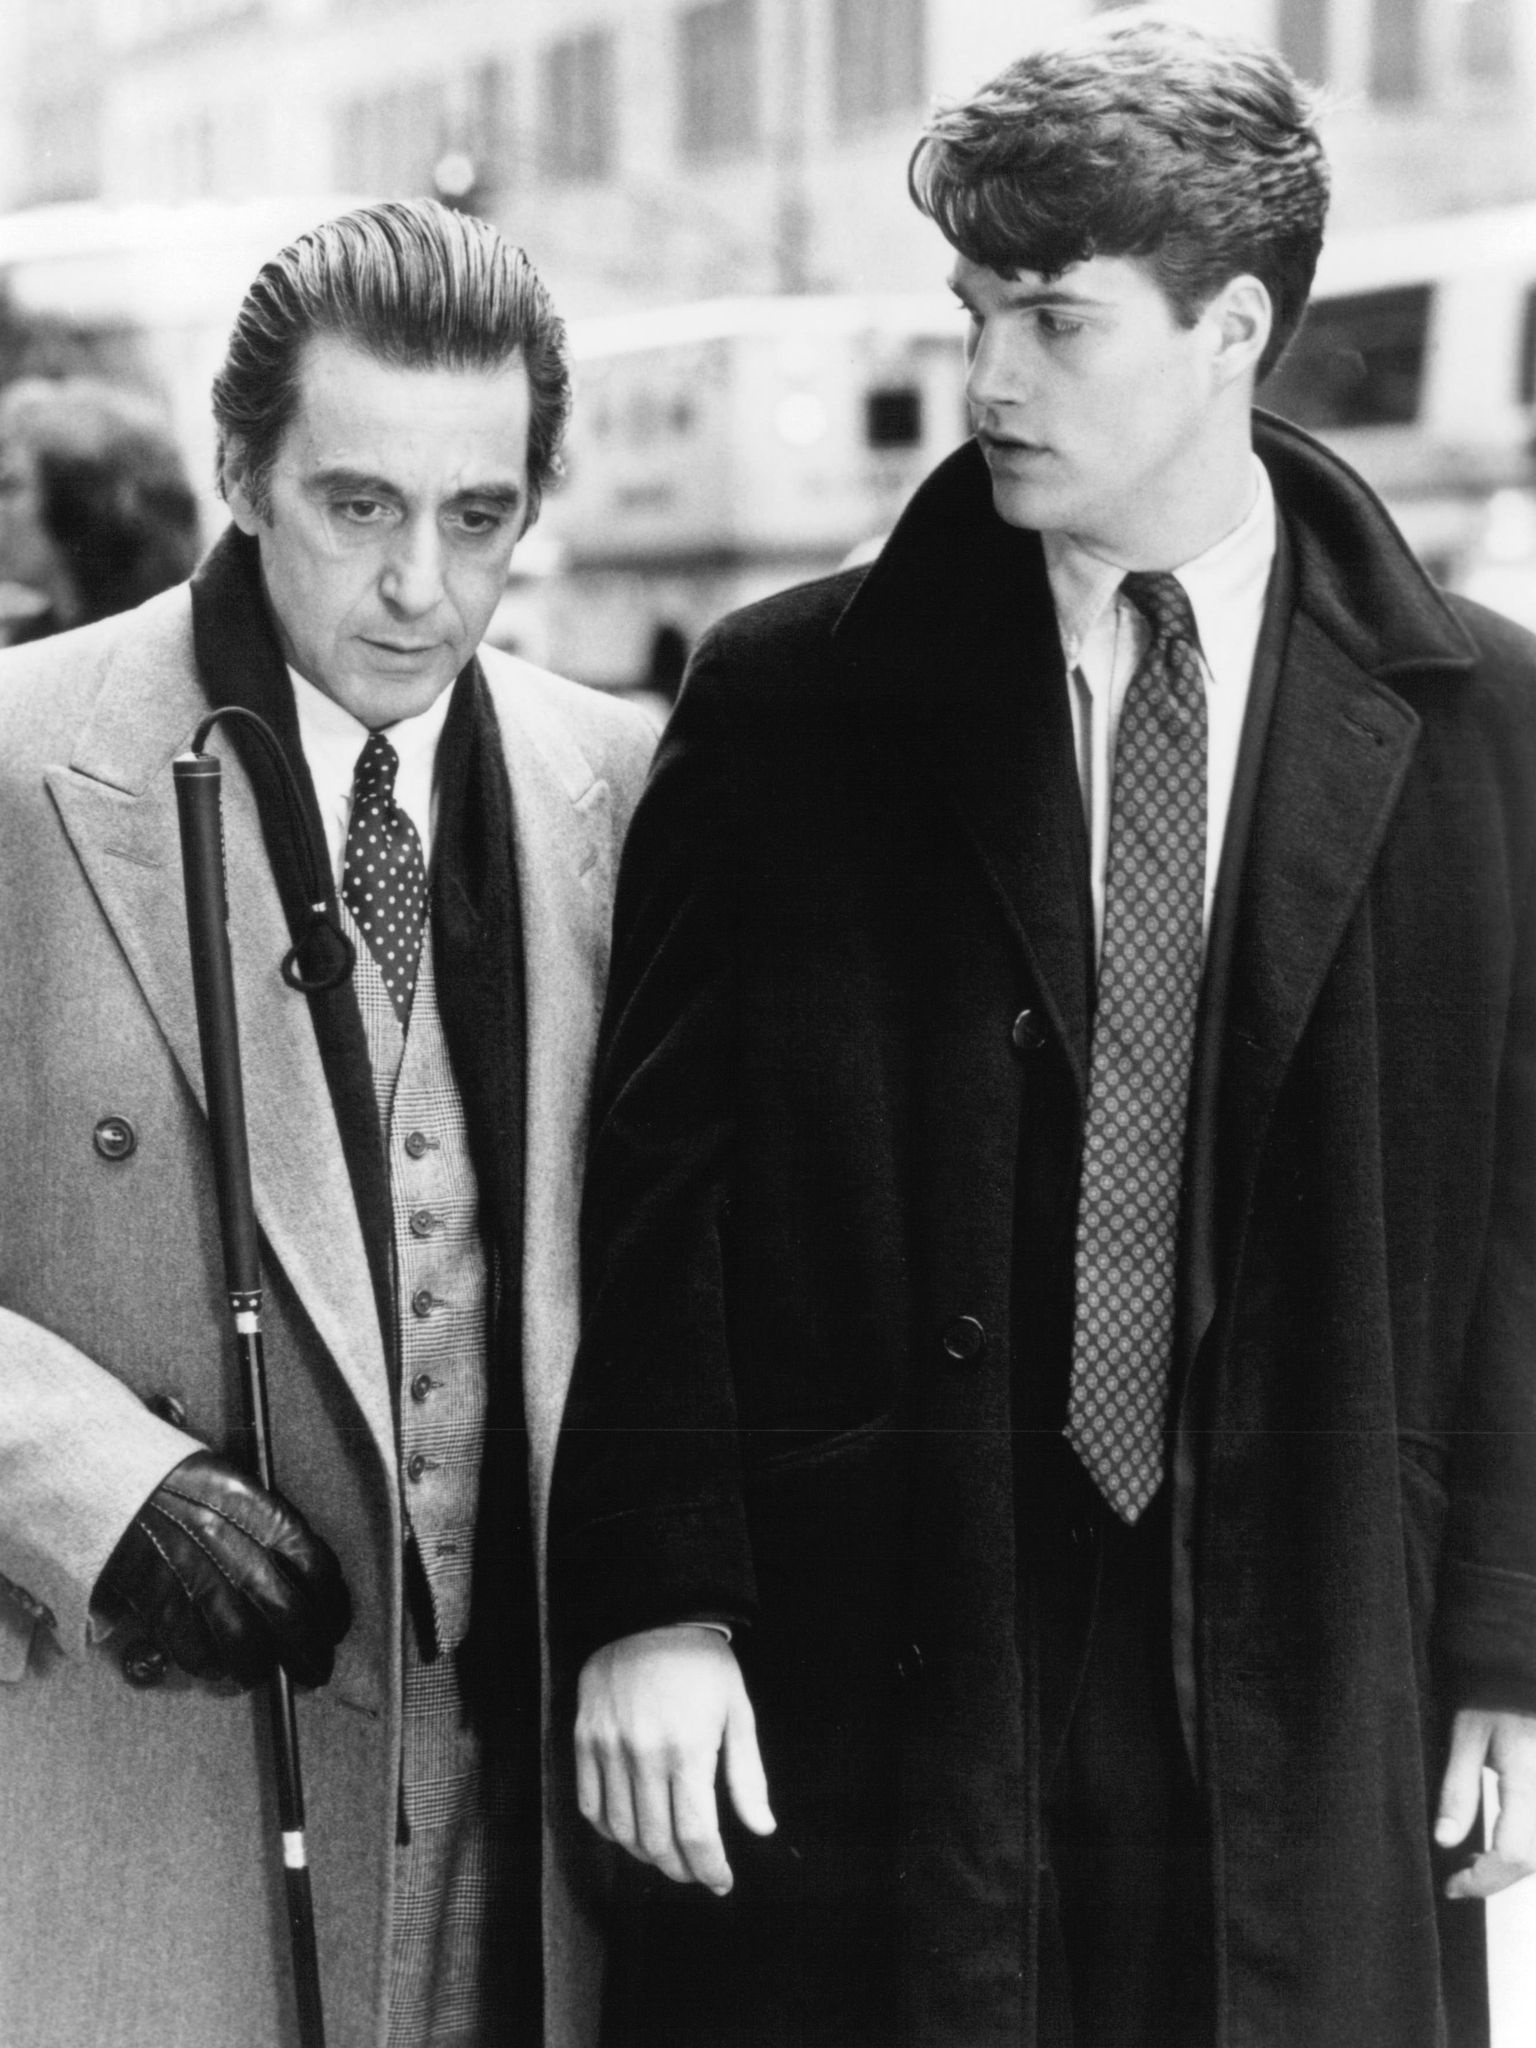 Scent of a Woman: Al Pacino as Lt. Col. Frank Slade, Chris O'Donnell as Charlie Simms. 1540x2050 HD Background.